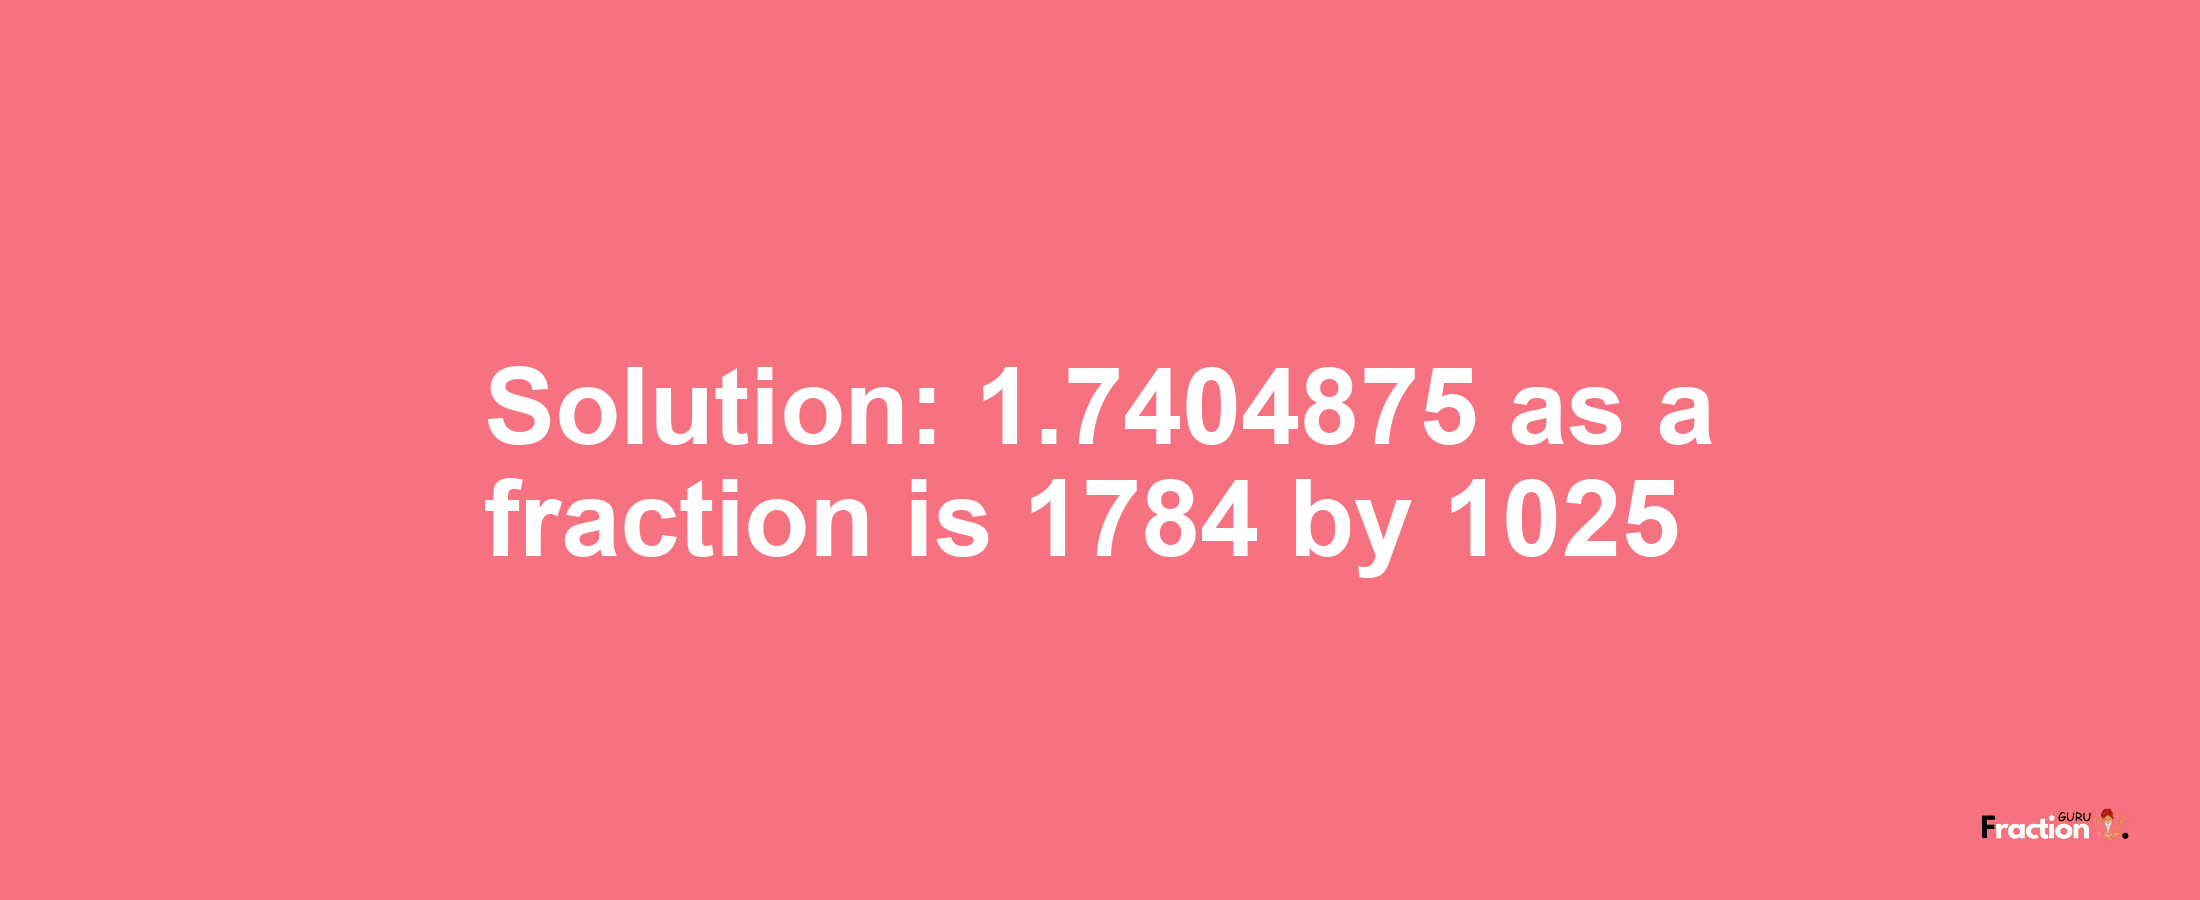 Solution:1.7404875 as a fraction is 1784/1025